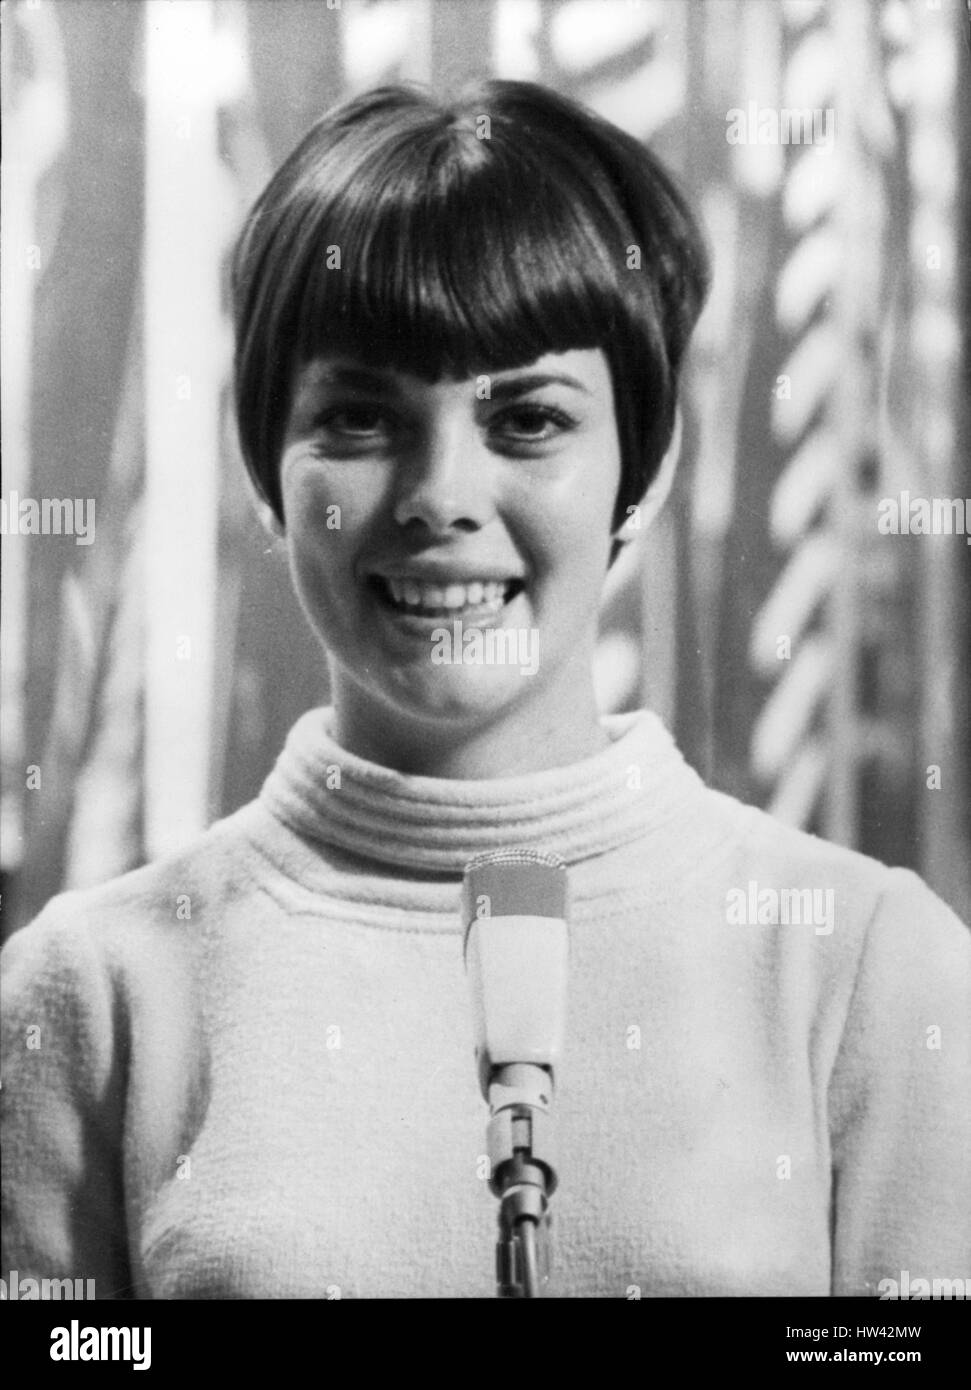 Jul. 07, 1967 - Mireille Mathieu 21: Mireille Mathieu, the famous young singer proclaimed as the new Edith Piaf will be celebrating her coming of age in two days. Arecent picture of Mireille Mathieu. (Credit Image: © Keystone Press Agency/Keystone USA via ZUMAPRESS.com) Stock Photo